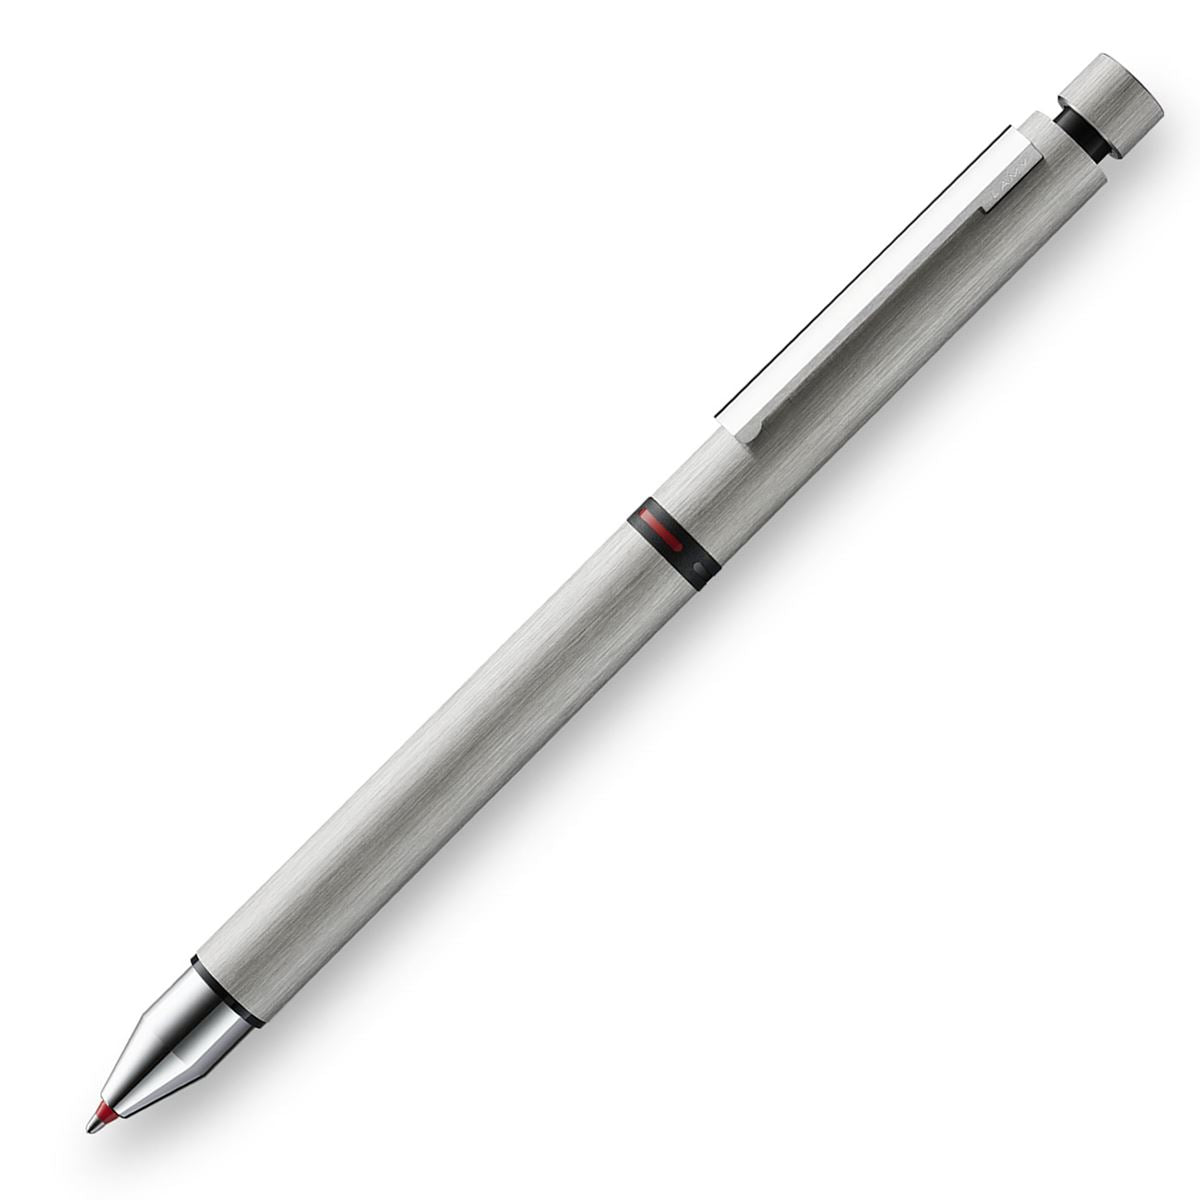 Lamy CP 1 Brushed Stainless Steel Tri Pen Multi-Function Pen